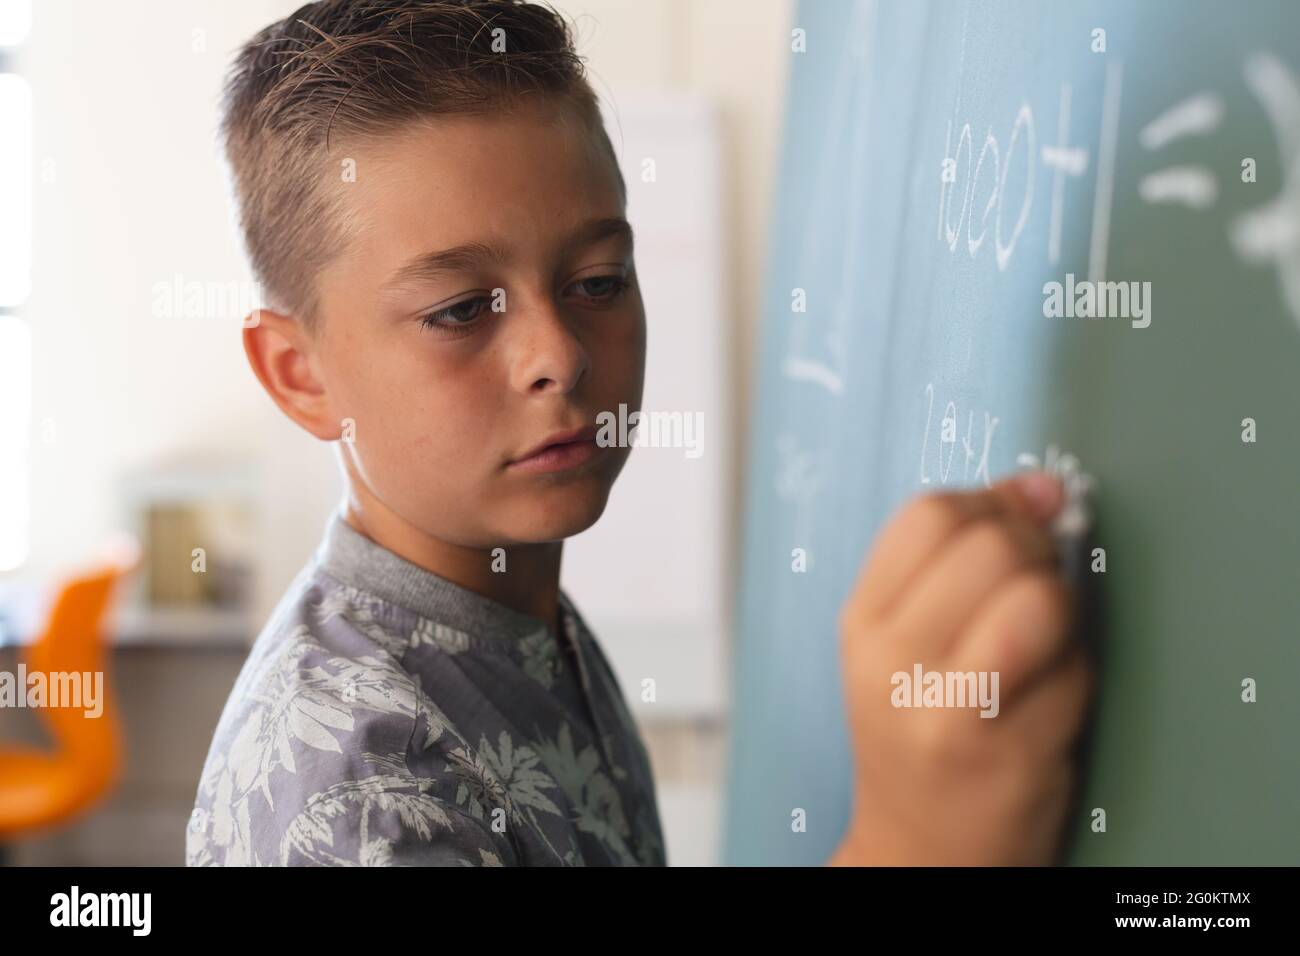 Caucasian boy standing at chalkboard writing in classroom during maths lesson Stock Photo